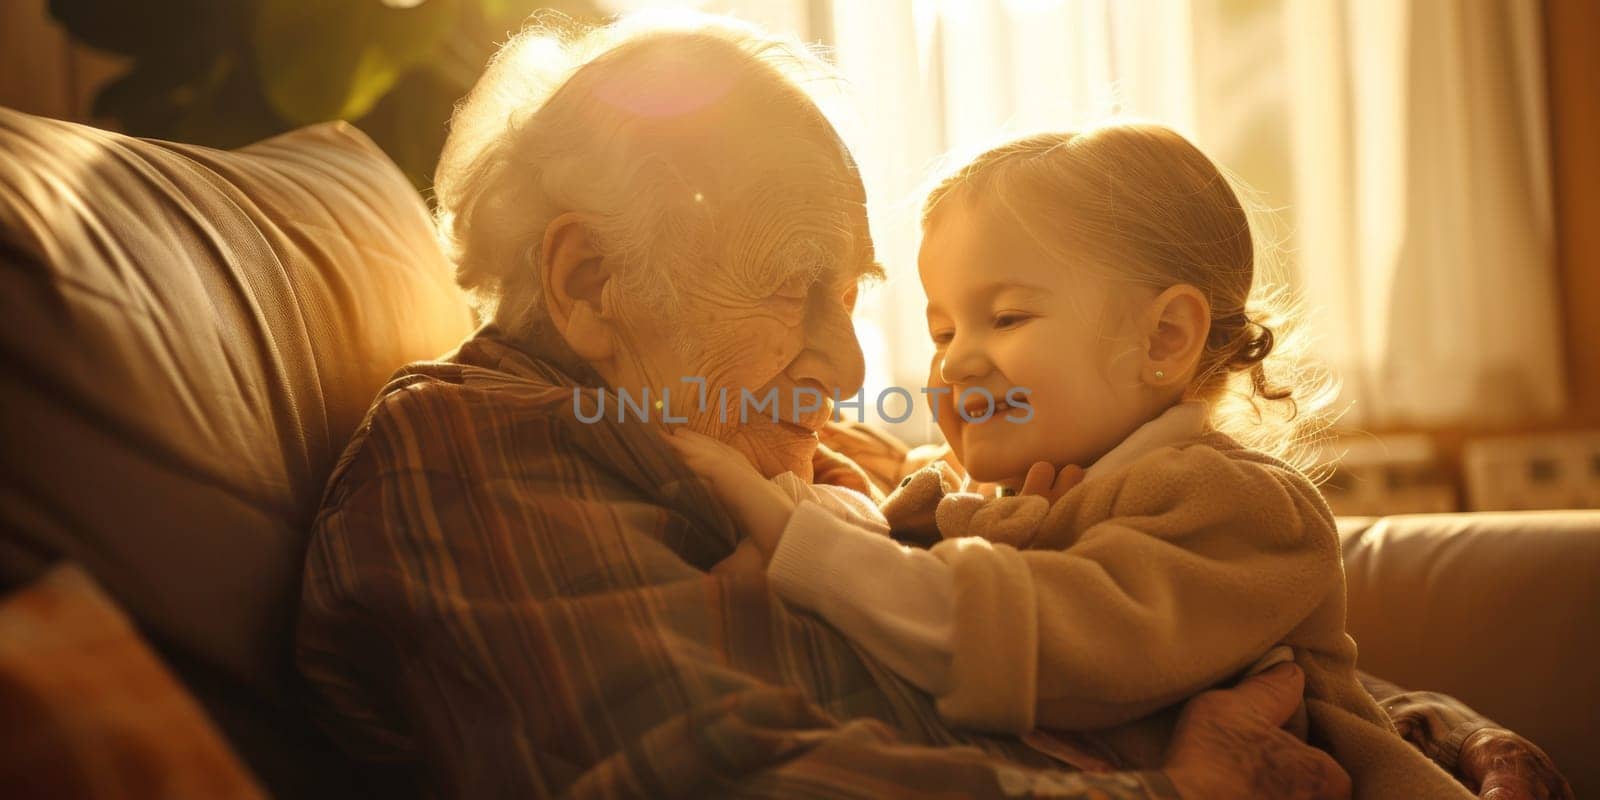 Moment of a young child visiting an elderly relative in a nursing home, sharing smiles and laughter by Kadula